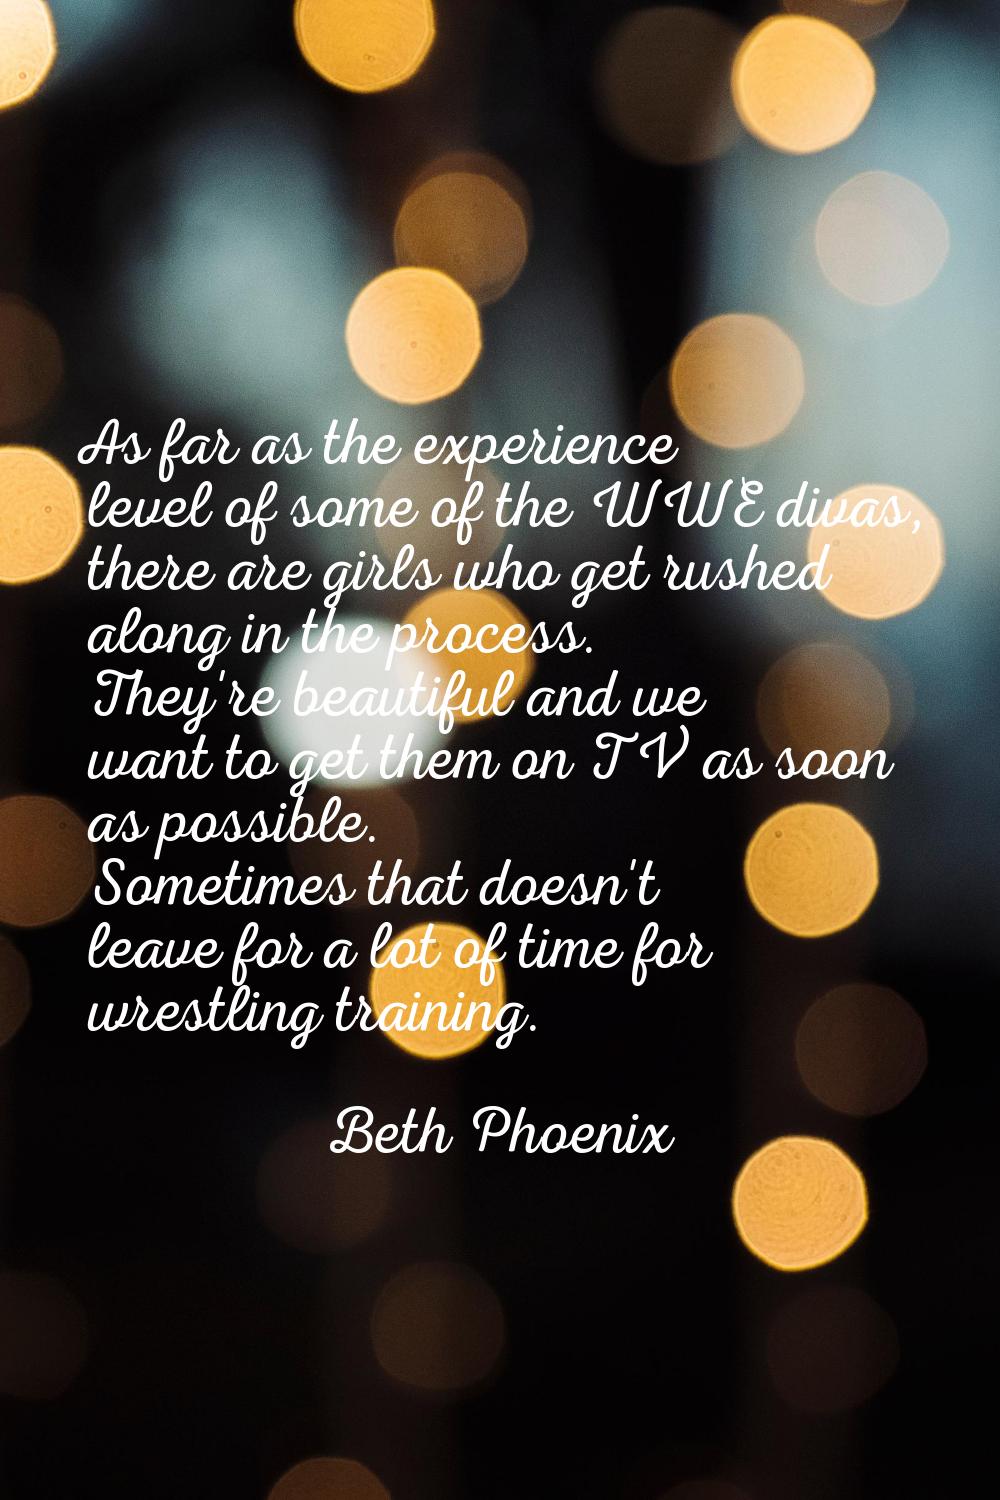 As far as the experience level of some of the WWE divas, there are girls who get rushed along in th